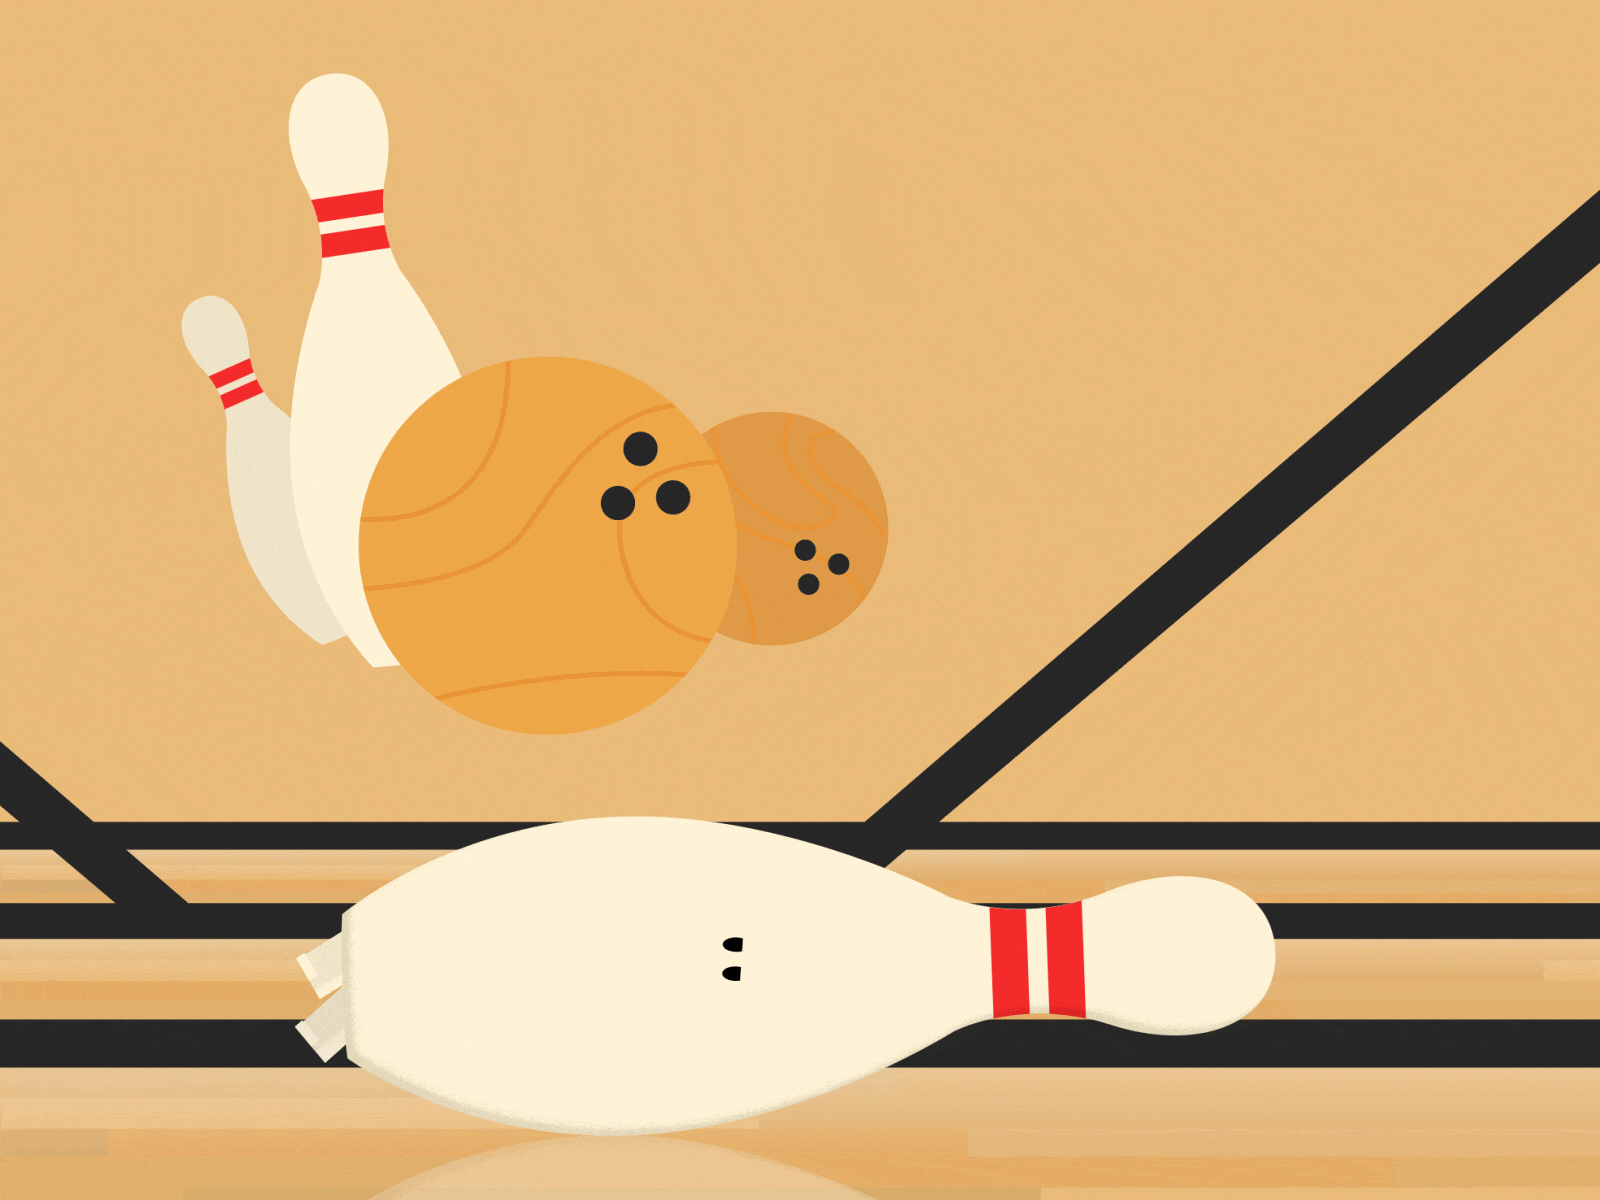 Bowling time! by Chris Koens on Dribbble